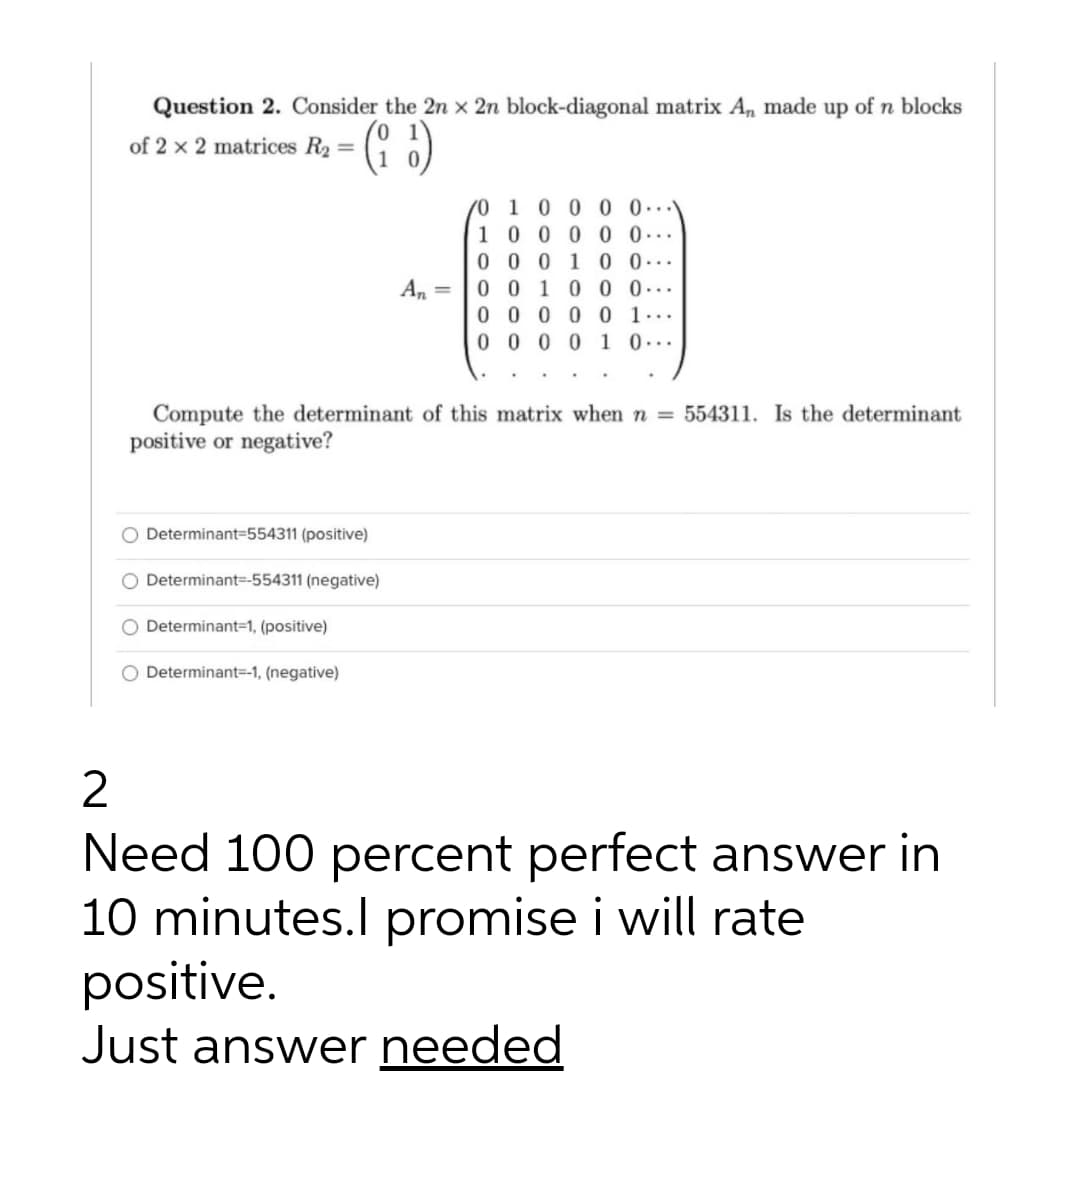 Question 2. Consider the 2n x 2n block-diagonal matrix A, made up of n blocks
1
of 2 x 2 matrices R2 = ( 0)
0 1 0 0 0 0..
10 0 0 0 0...
0 0 0 1 0 0...
0 0 1 0 0 0...
0 0 0 0 0 1...
0 0 0 0 1 0...
An =
Compute the determinant of this matrix when n = 554311. Is the determinant
positive or negative?
O Determinant3D554311 (positive)
Determinant=-554311 (negative)
O Determinant=1, (positive)
O Determinant=-1, (negative)
2
Need 100 percent perfect answer in
10 minutes.l promise i will rate
positive.
Just answer needed
